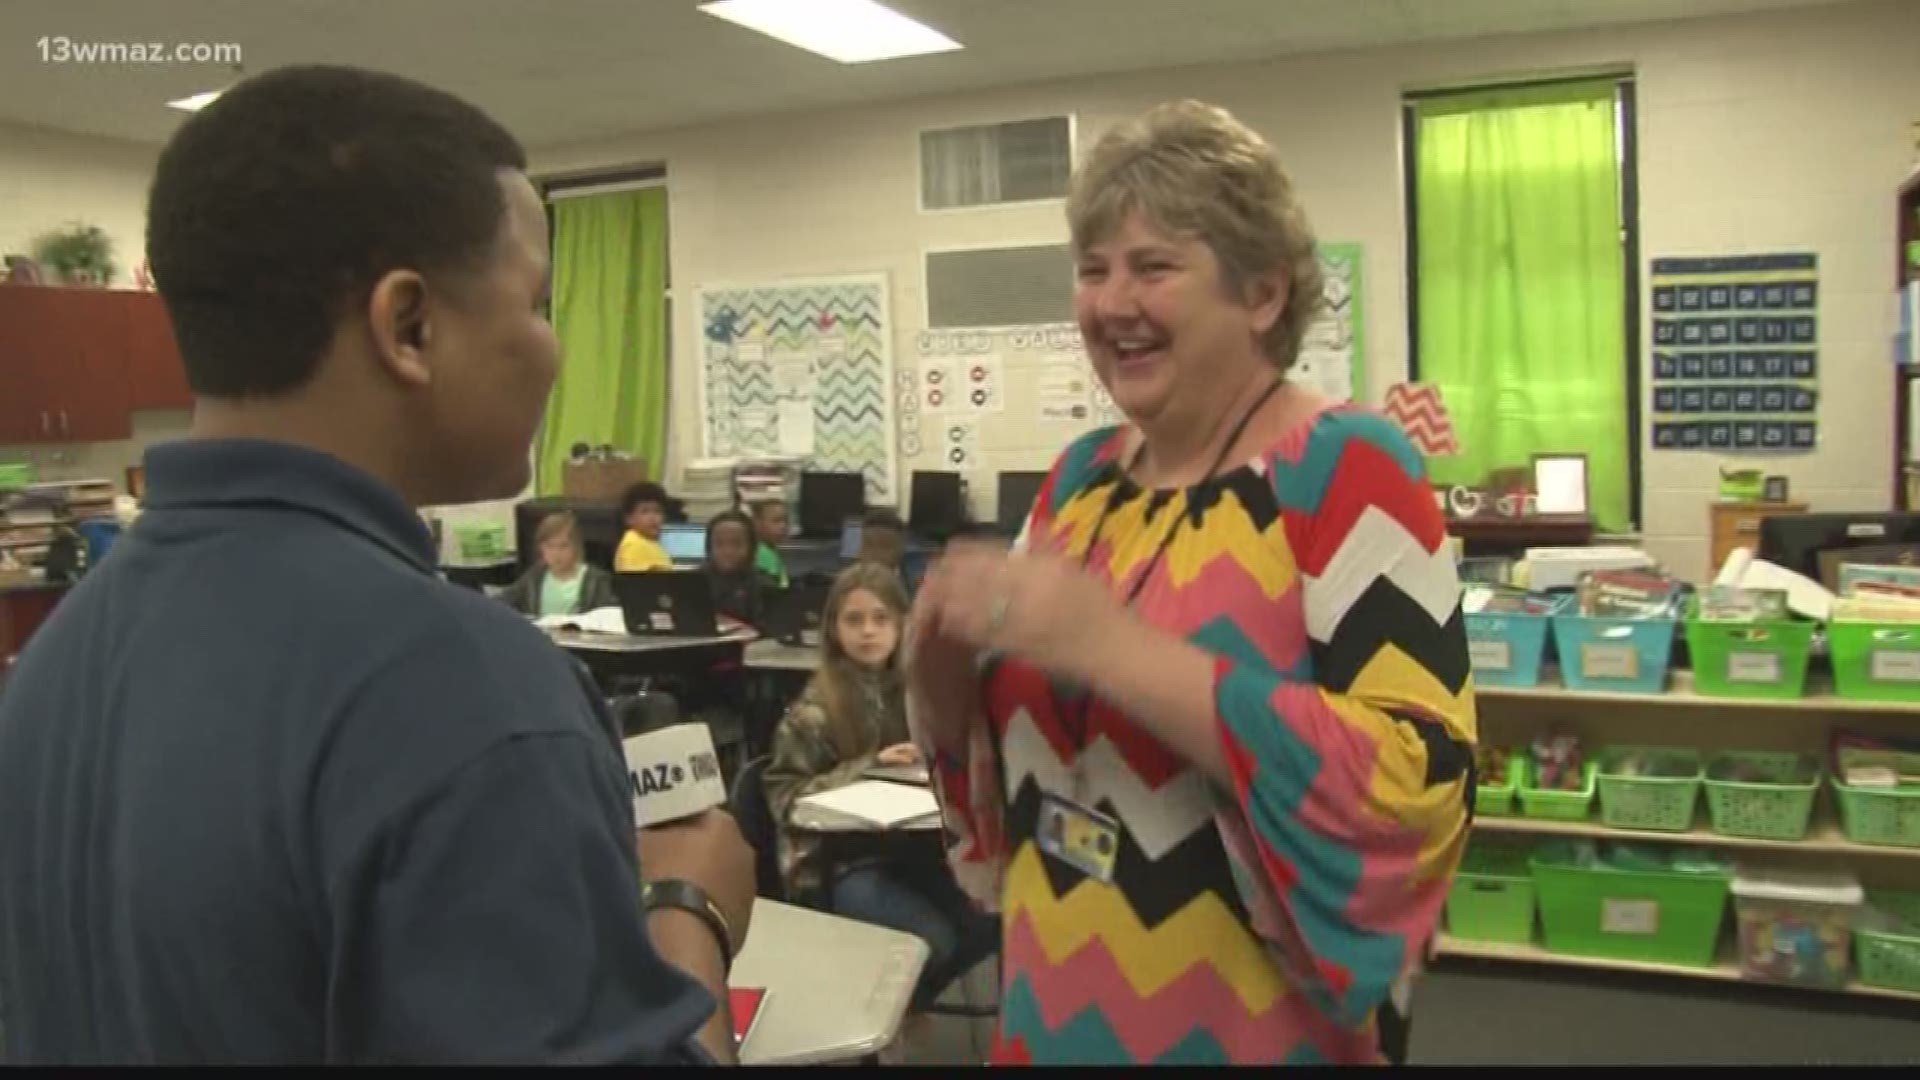 This week's My Teacher is Tops winner is Mrs. Connie Thornton from Wilkinson County Primary School. She teaches science and math to her 3rd grade students.